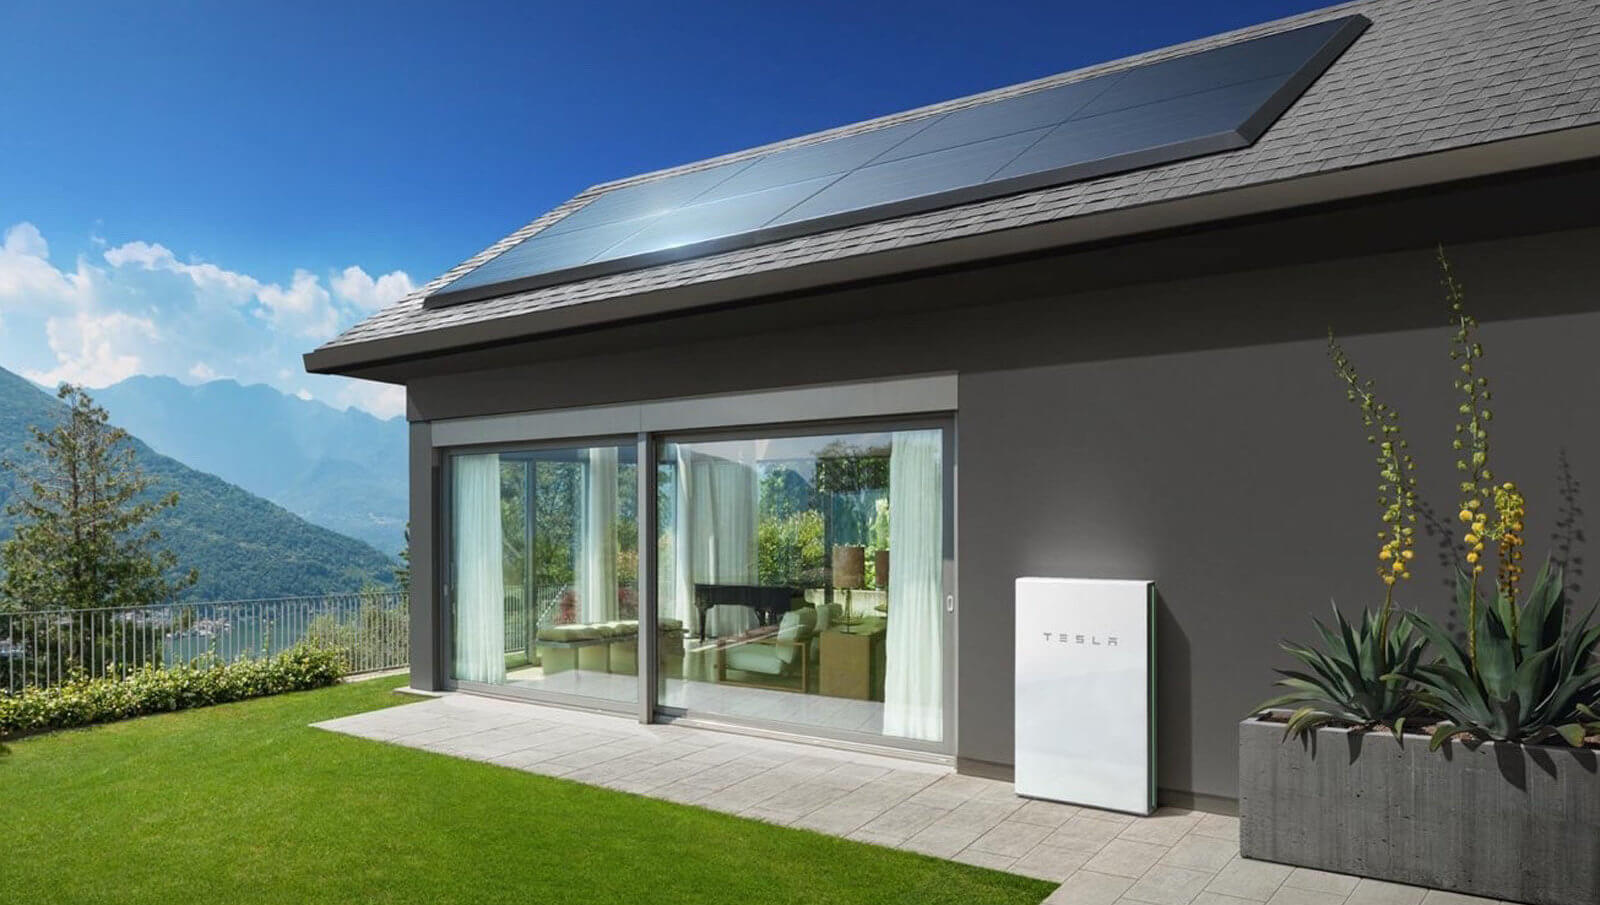 Solar panels Tesla can be rented for $ 50 per month. But not so smooth